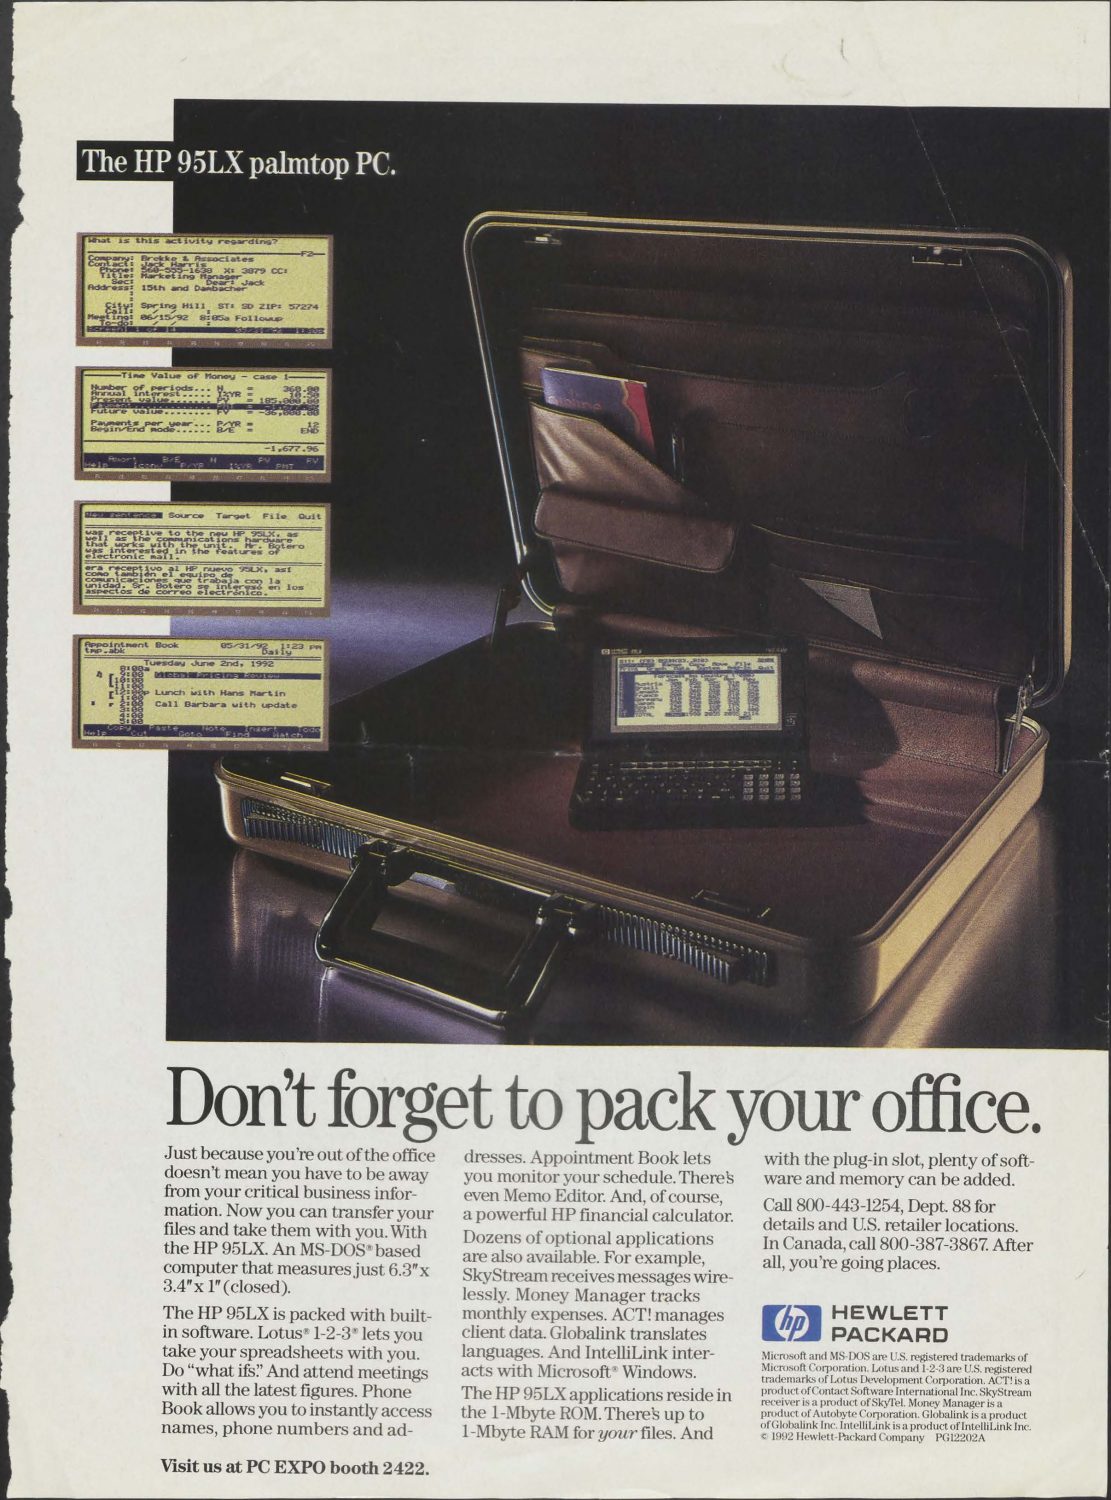 A print ad for the HP 95LX., the palmtop PC.